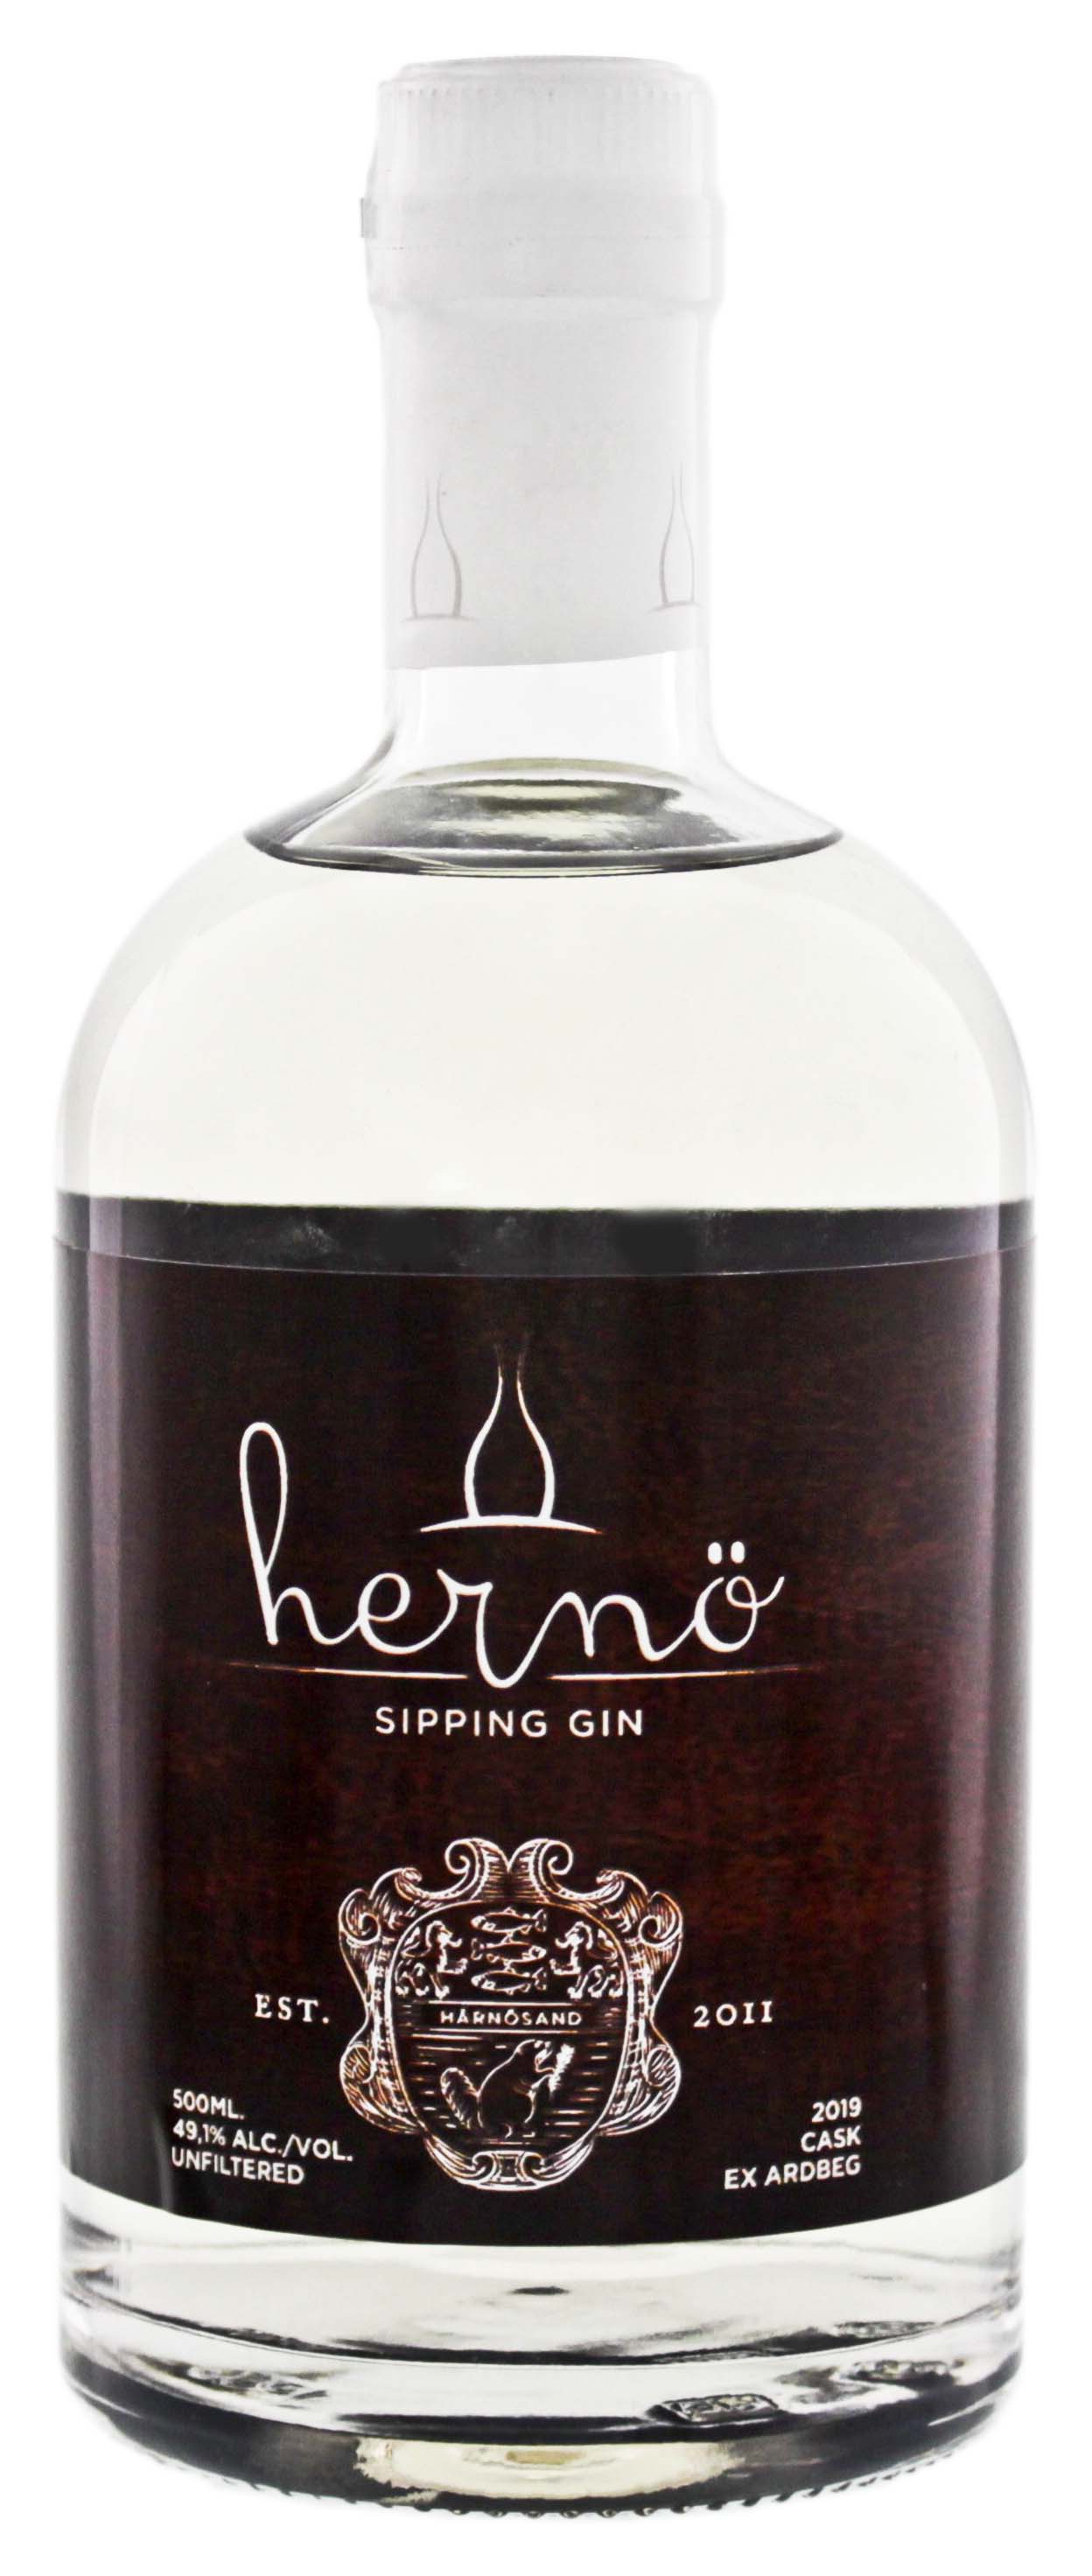 Hernö Sipping Gin No. 1.3 ex Islay Cask 0,5L / limited edition